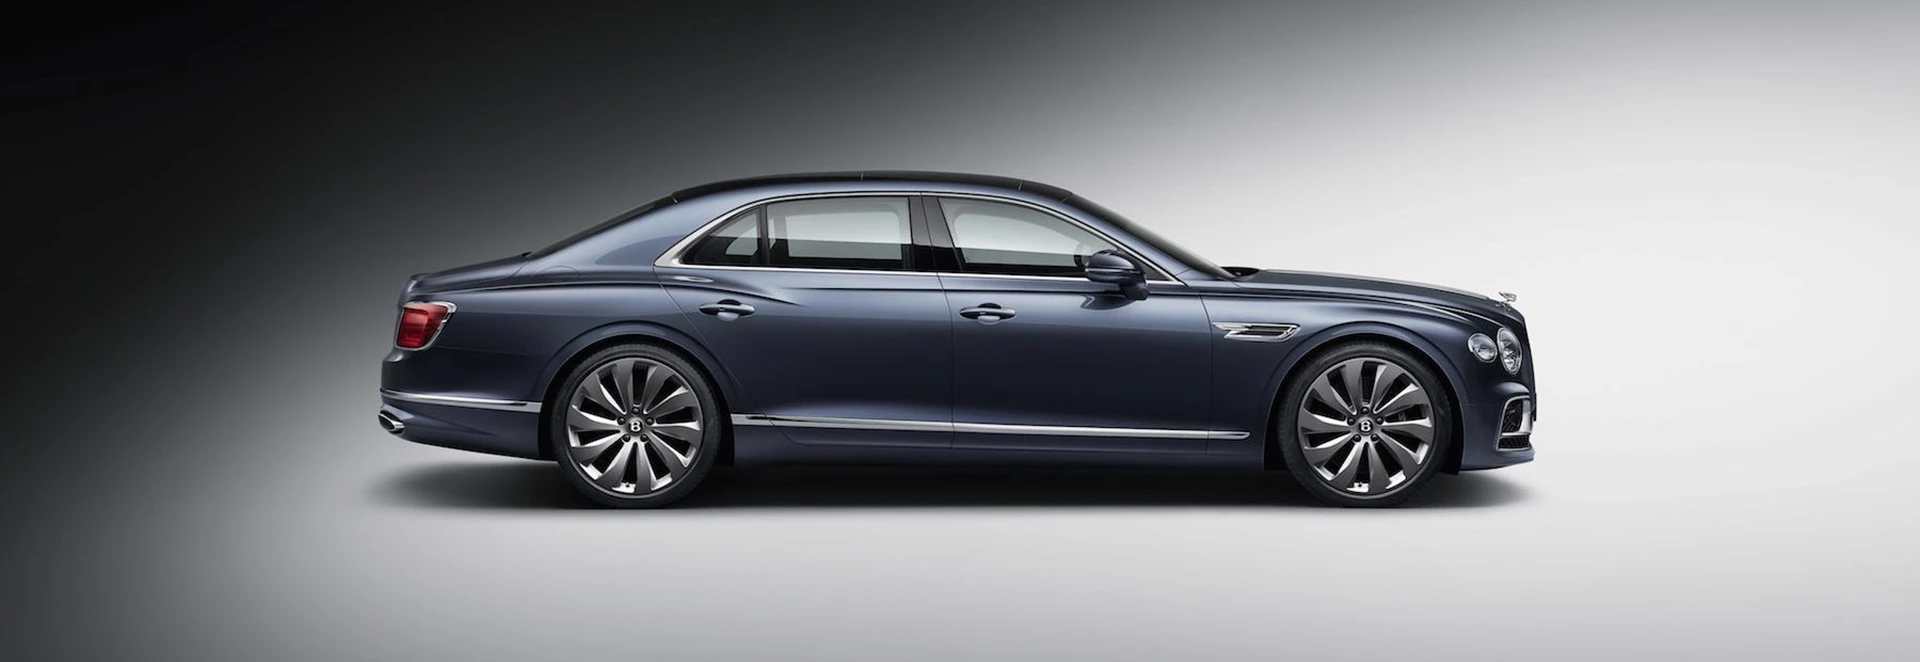 Bentley unveils luxurious new Flying Spur saloon 